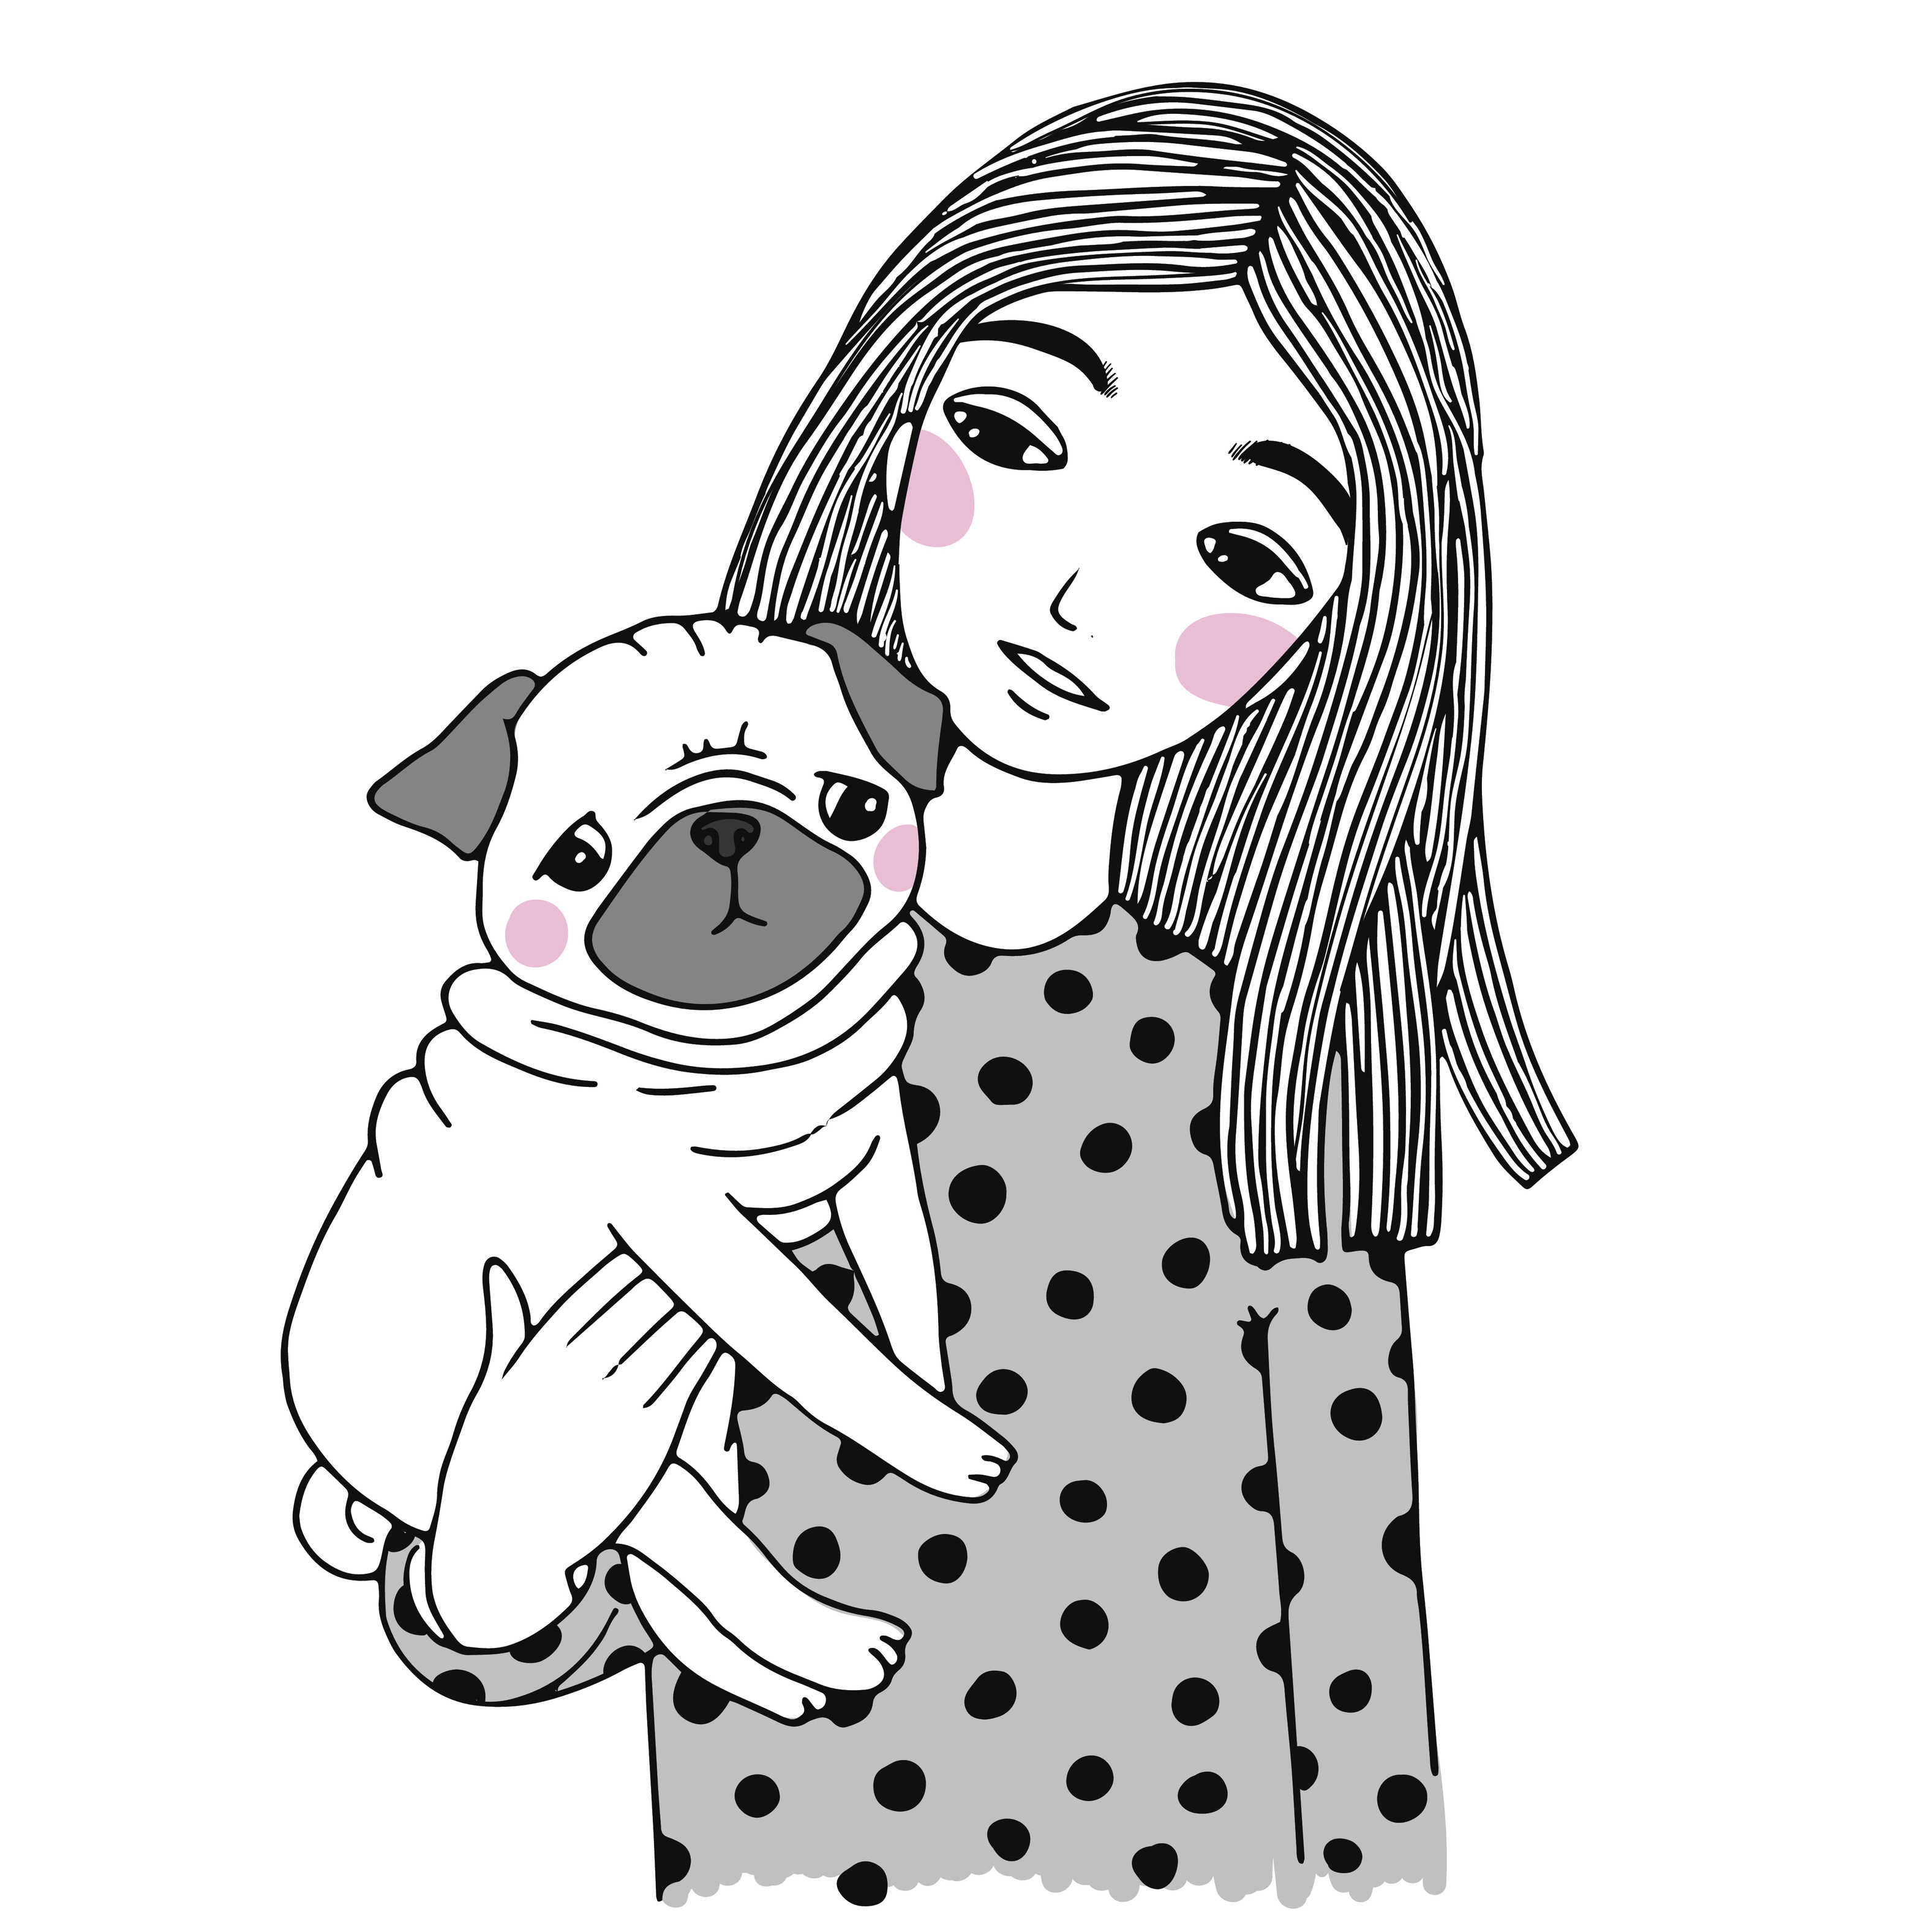 A generic photo of an illustration of a woman holding her pet dog (Thinkstock/PA)